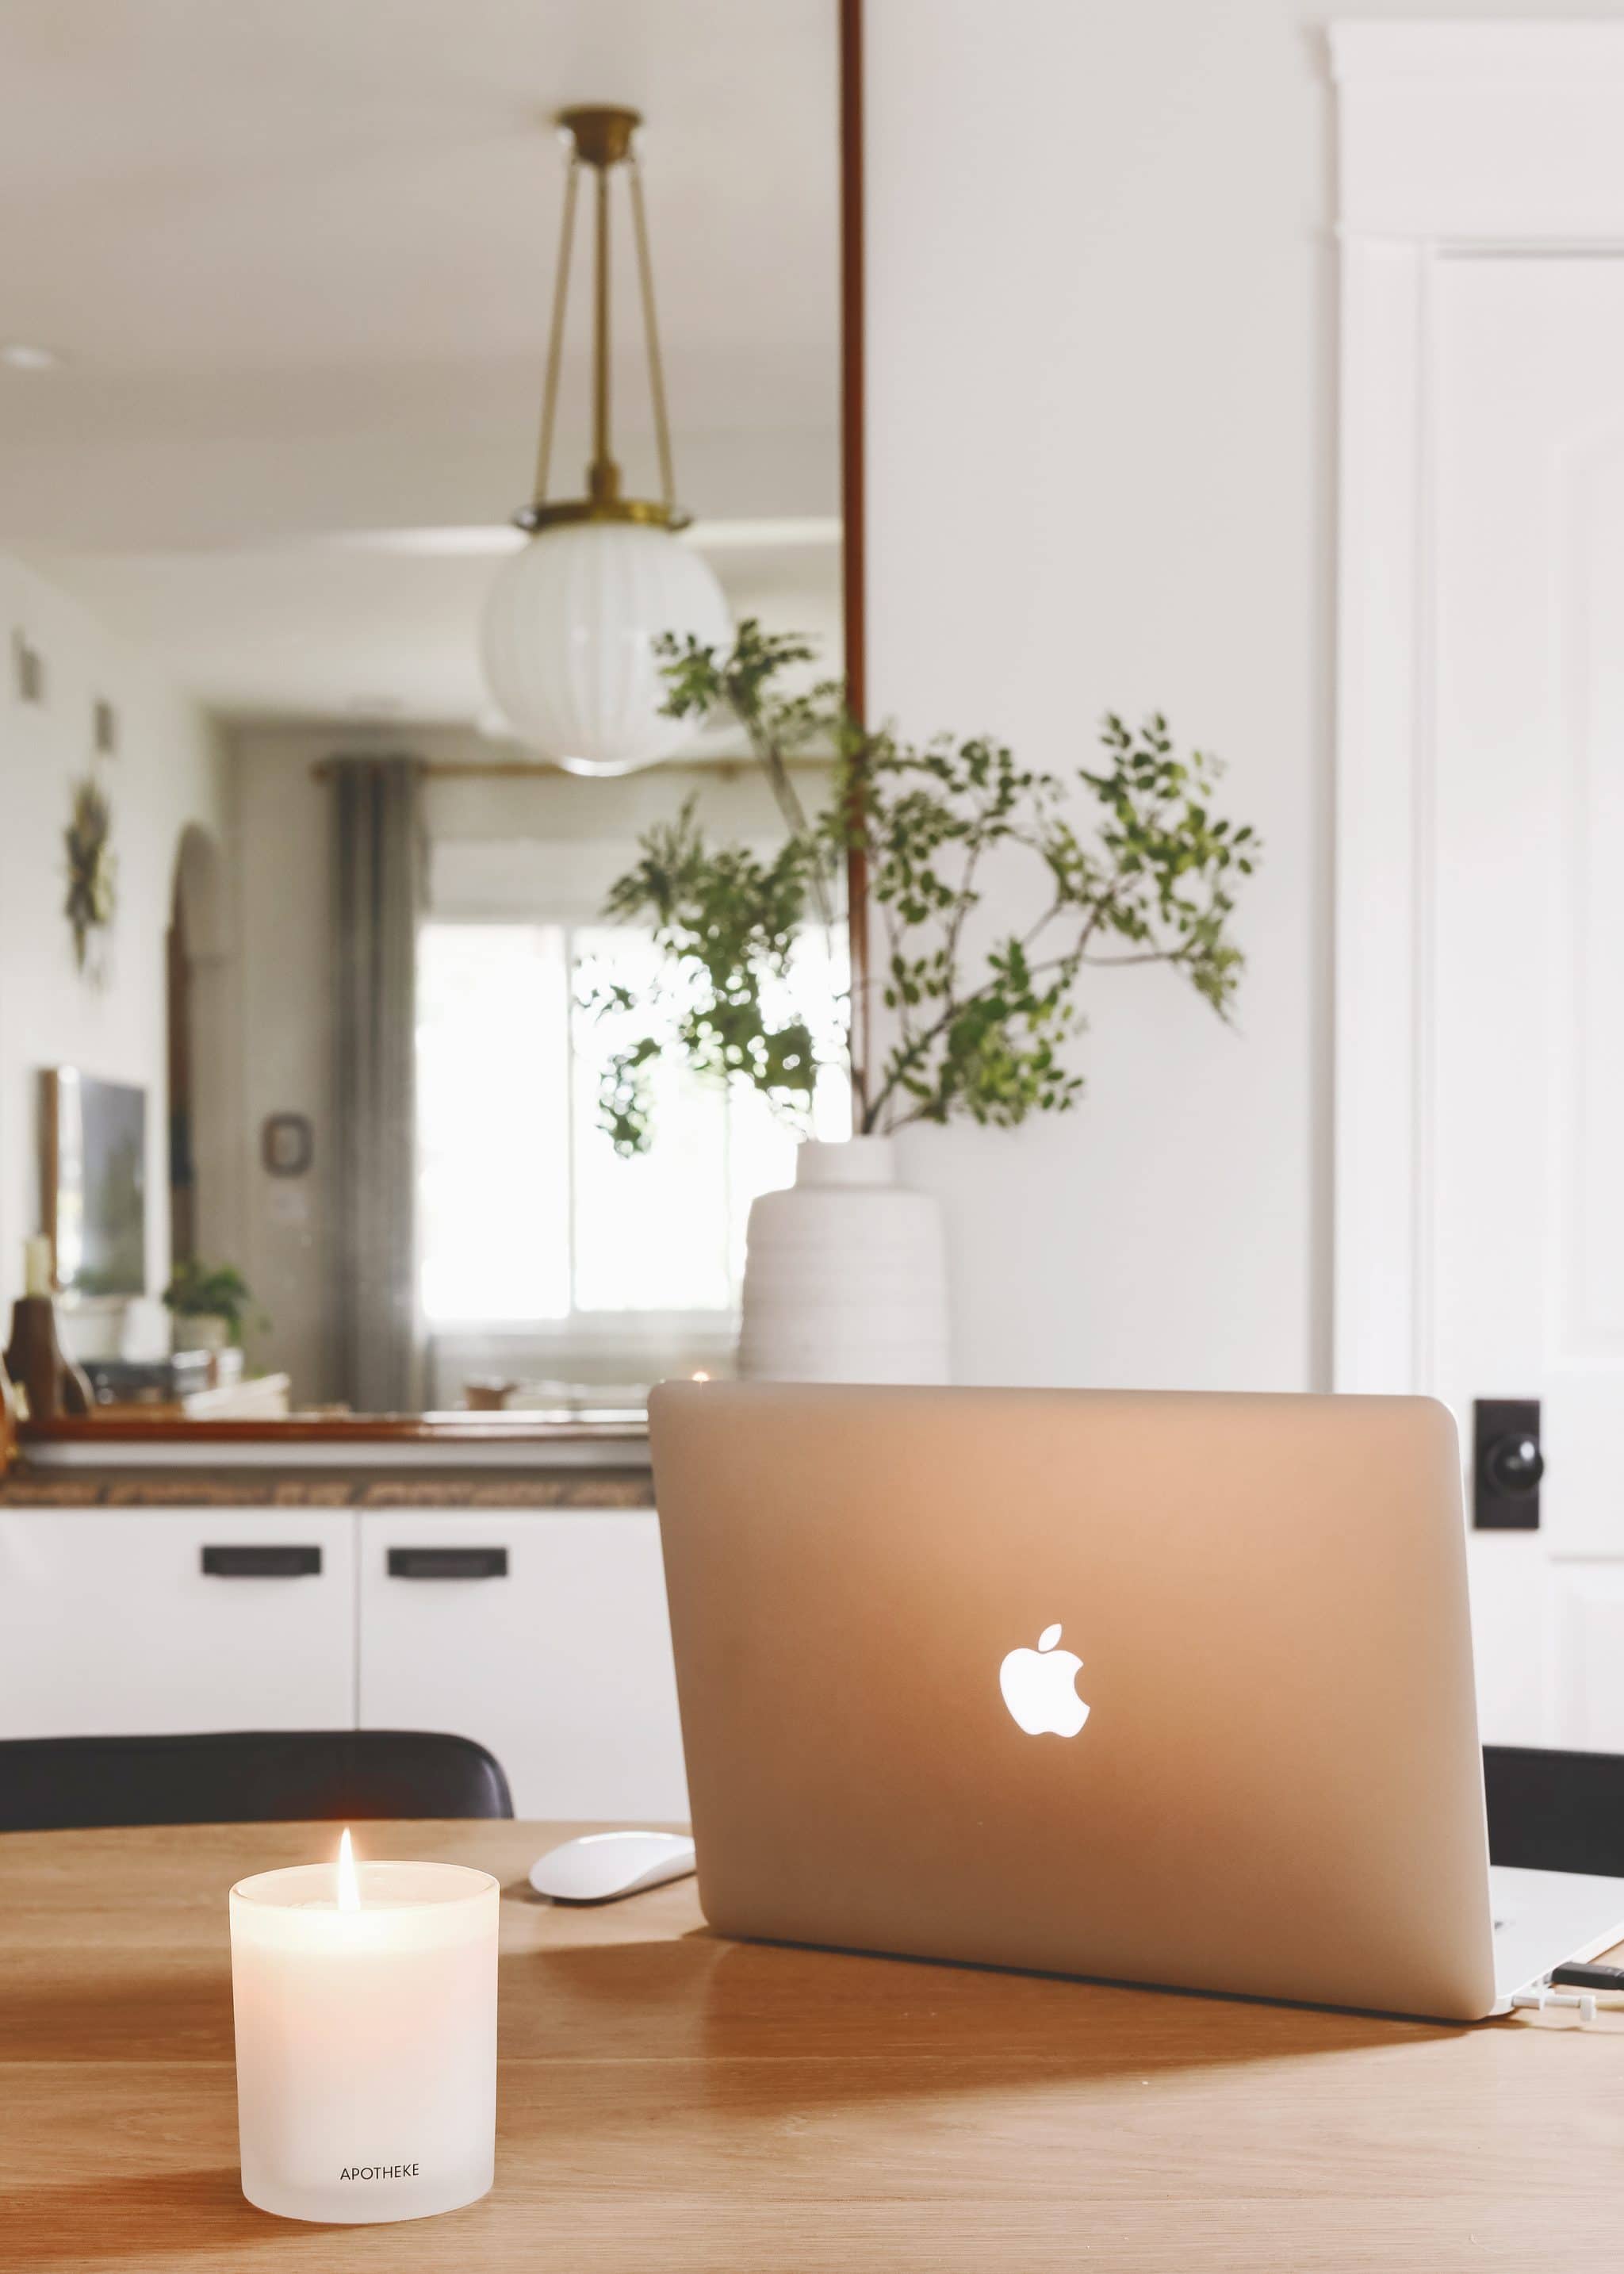 Laptop with a candle burning nearby, portraying a work from home day | the scents that fill our home, via Yellow Brick Home